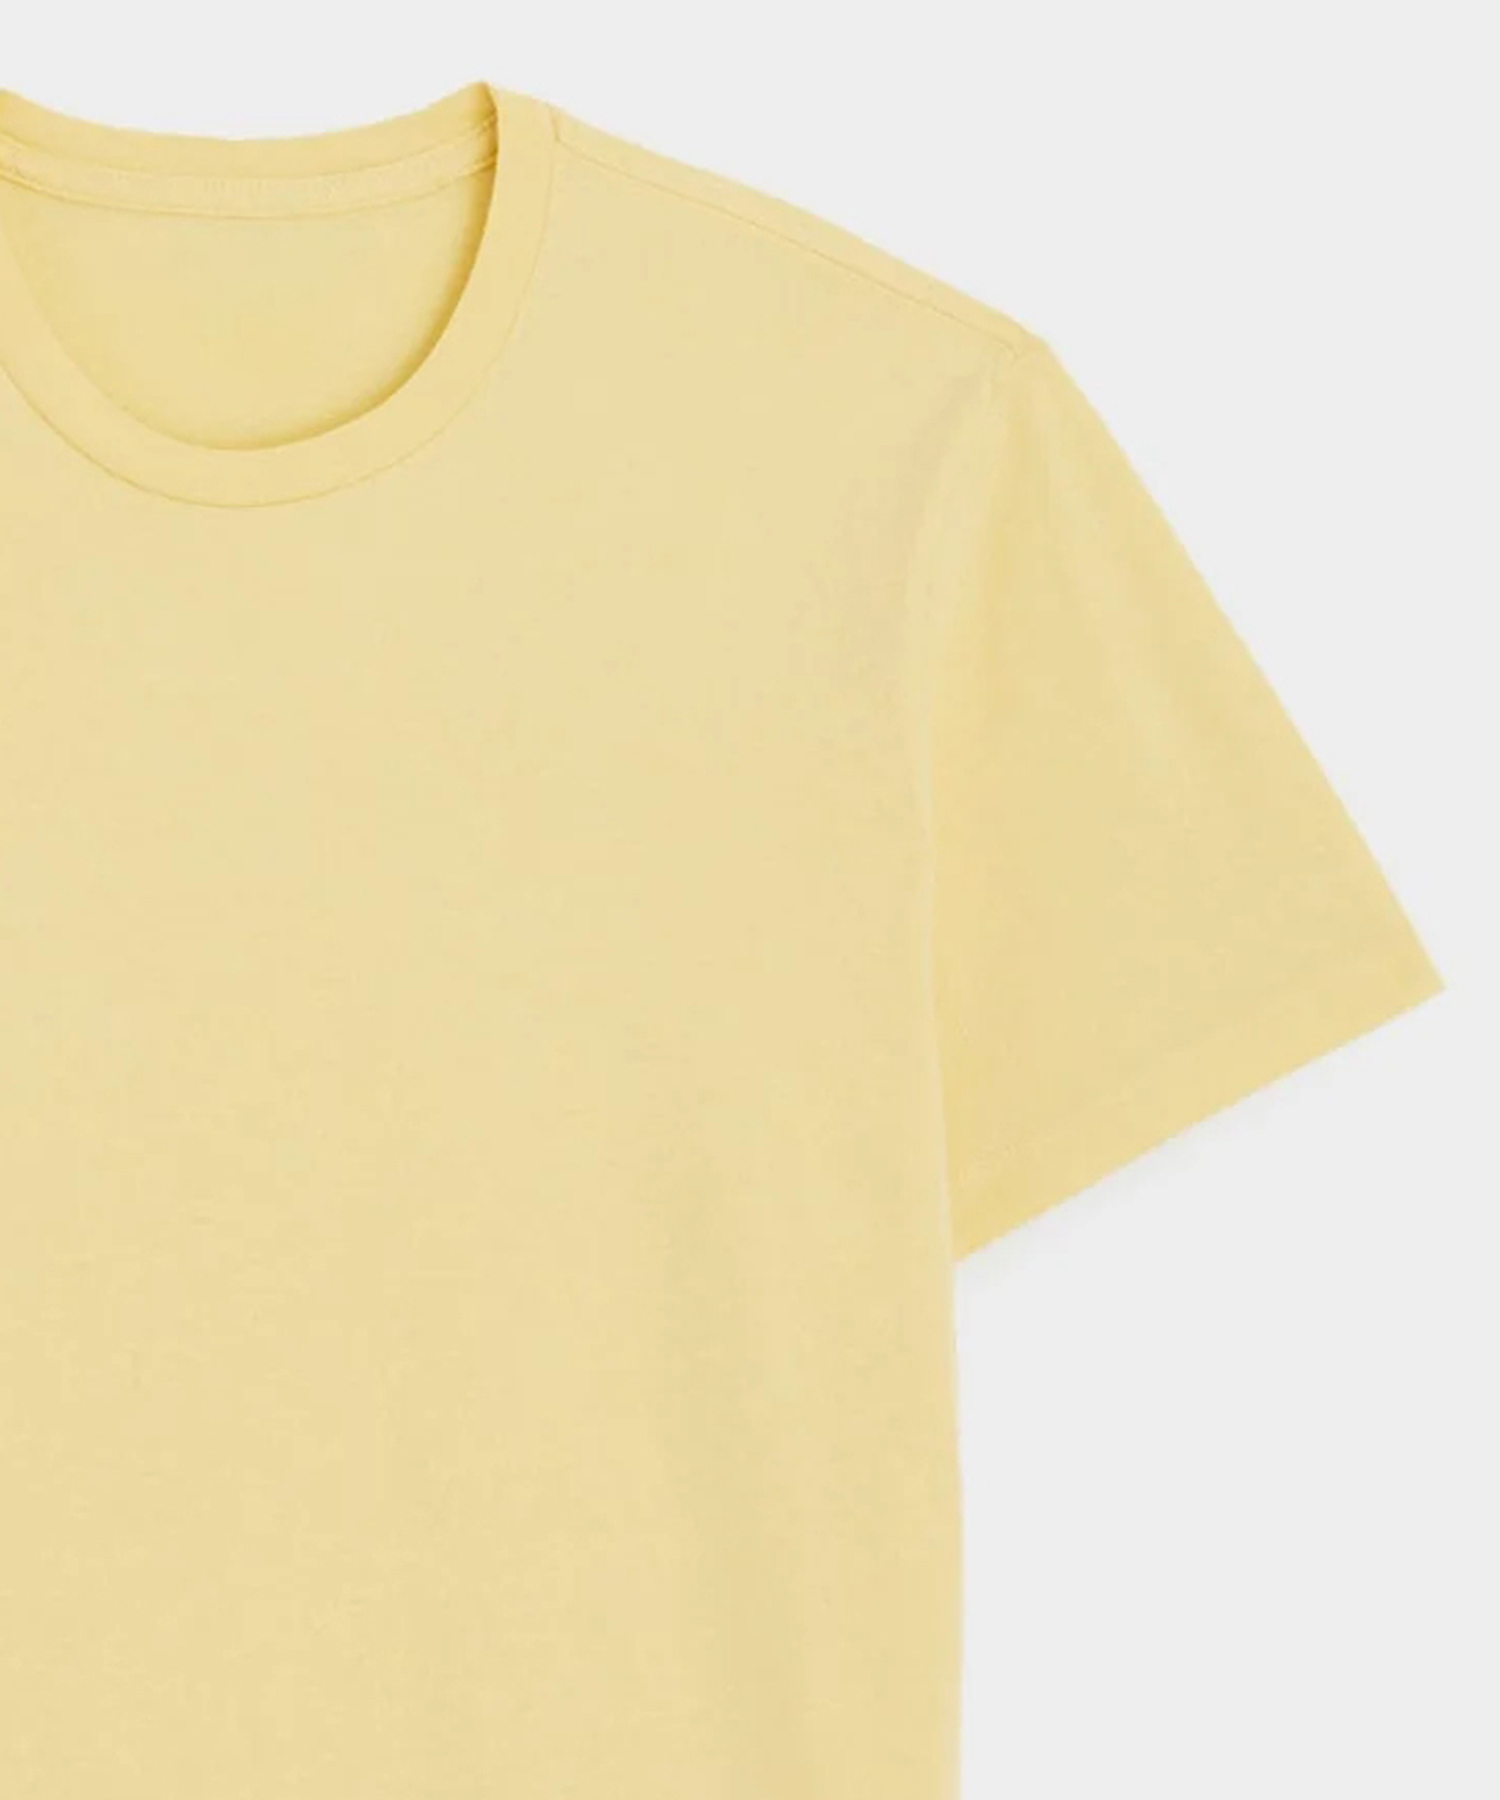 MADE IN L.A. PREMIUM JERSEY T-SHIRT IN LEMON